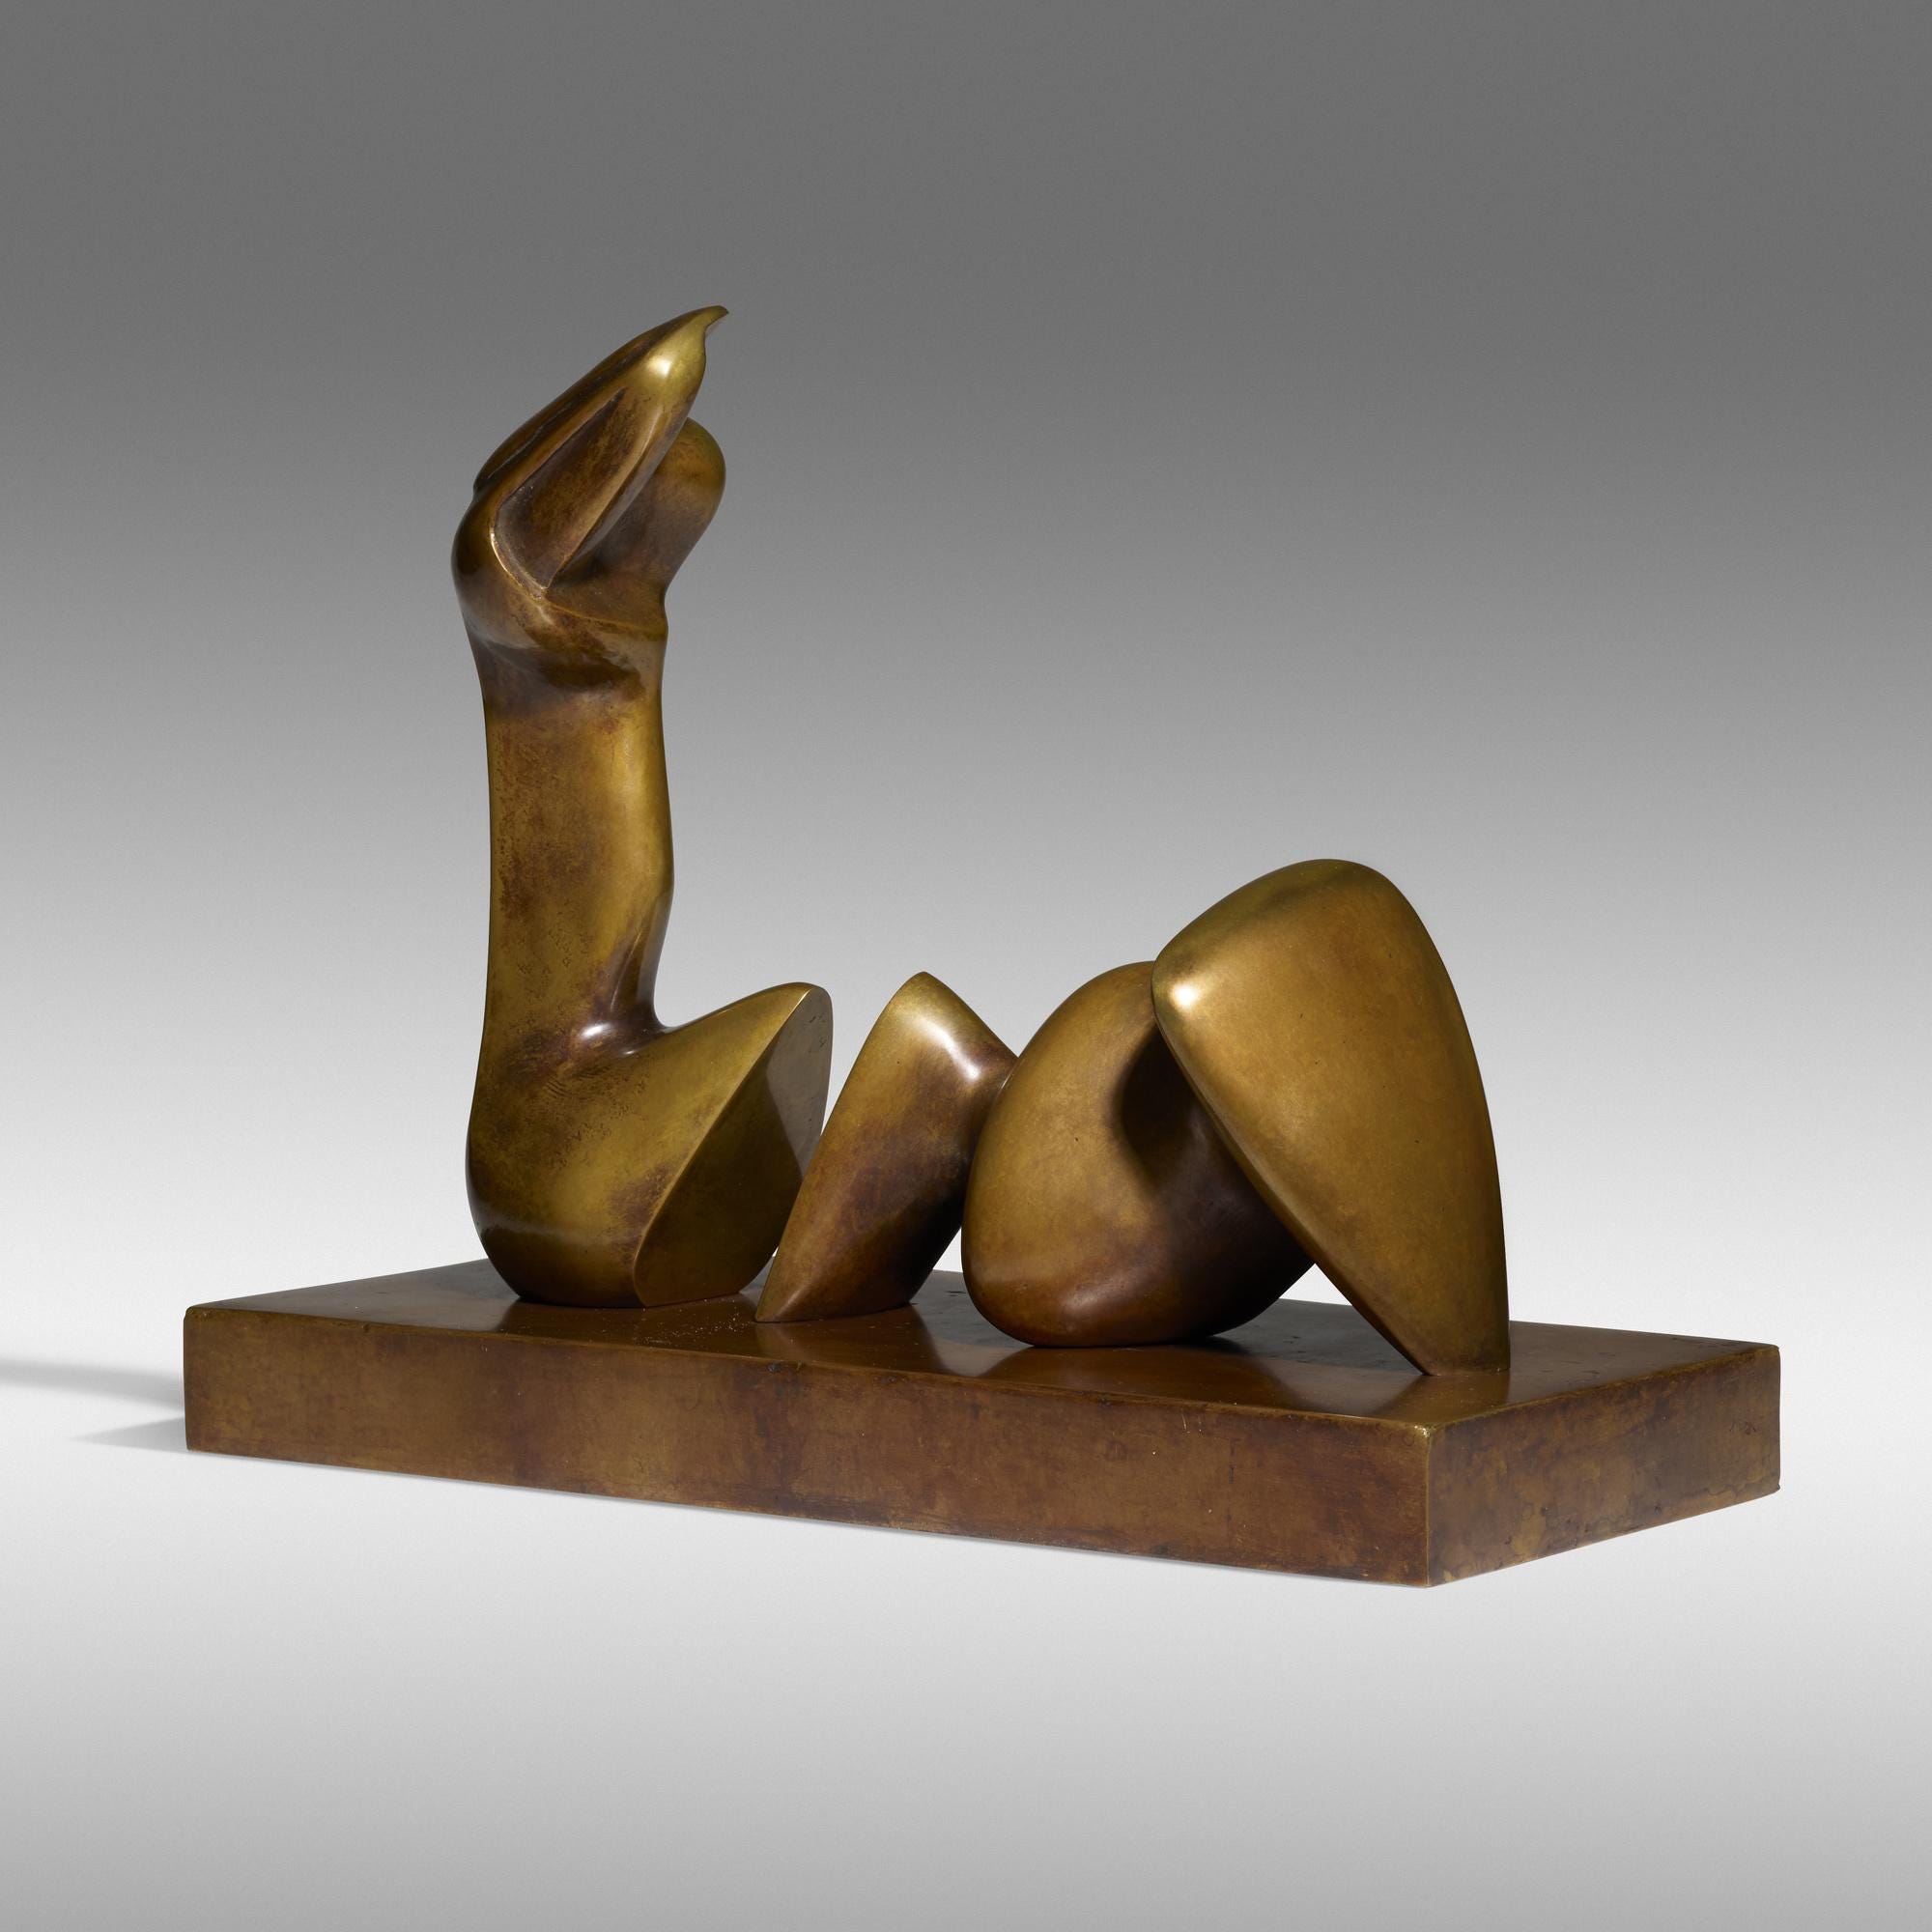 Architecture Prize (Two Piece Reclining Figure: Cut)